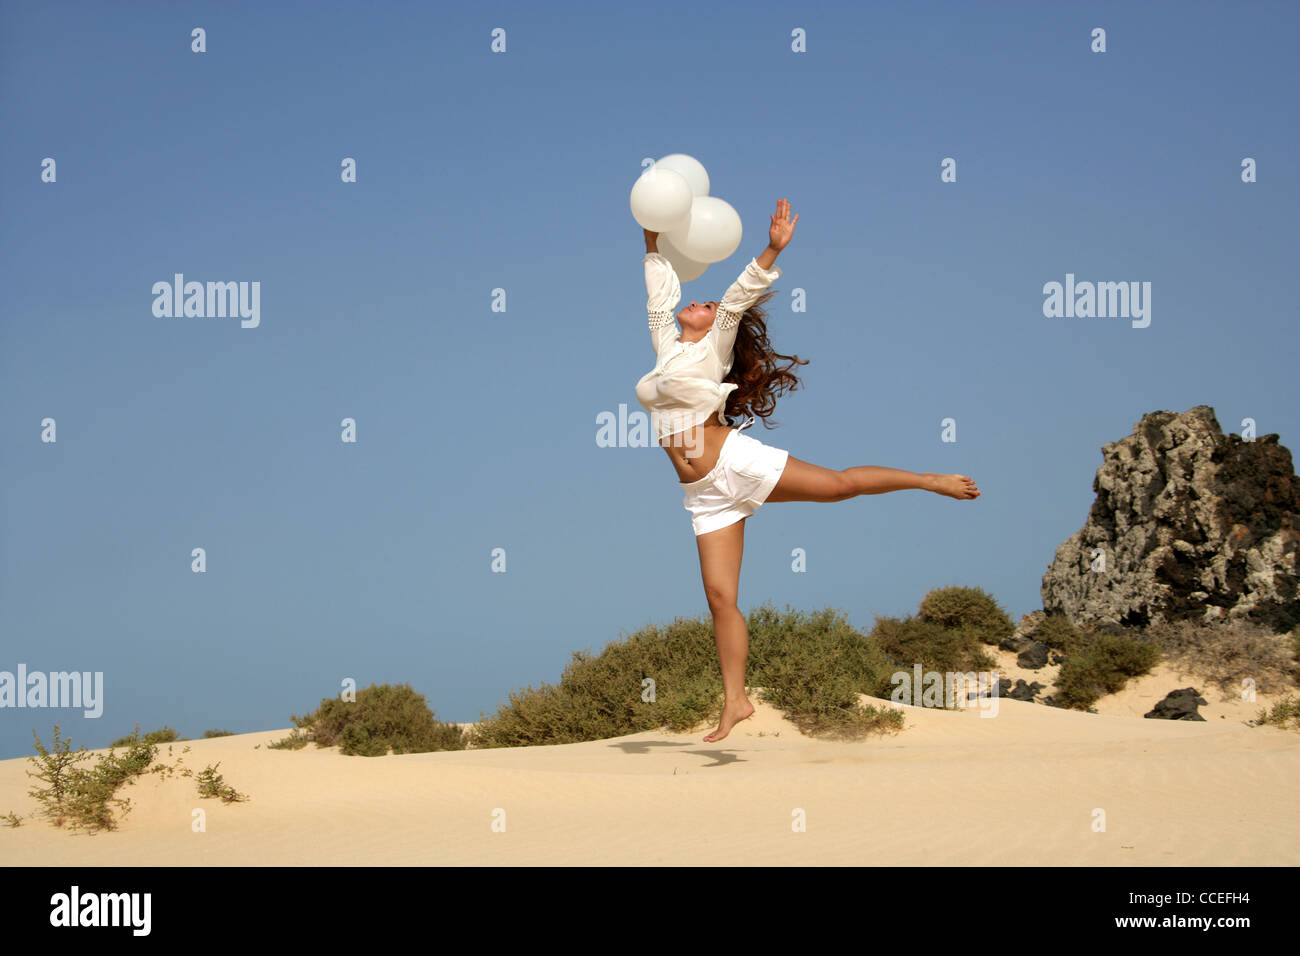 Indonesian Girl in a White Outfit with Balloons Jumping on Sand Dunes,  Fuerteventura, Canary Islands. Stock Photo